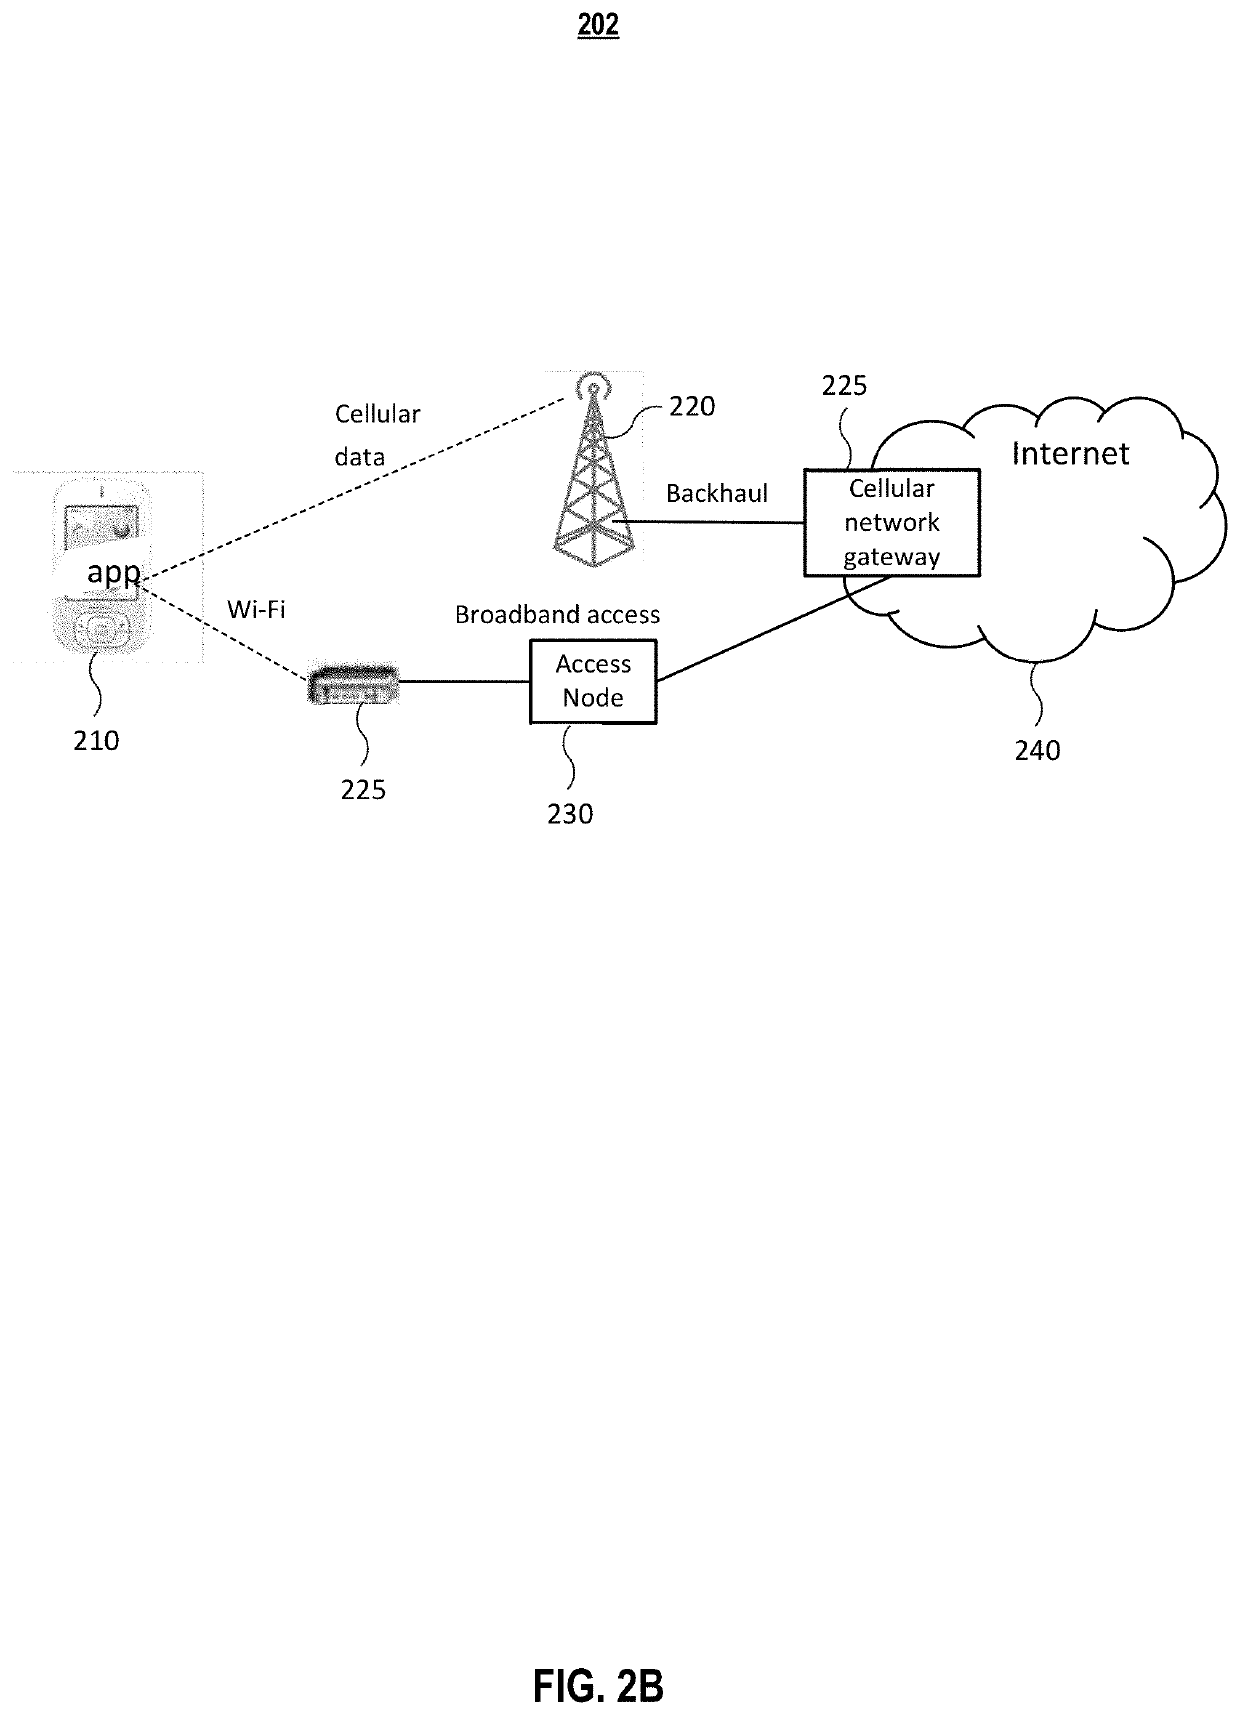 Systems and methods for combined management with user preferences of wi-fi and cellular data